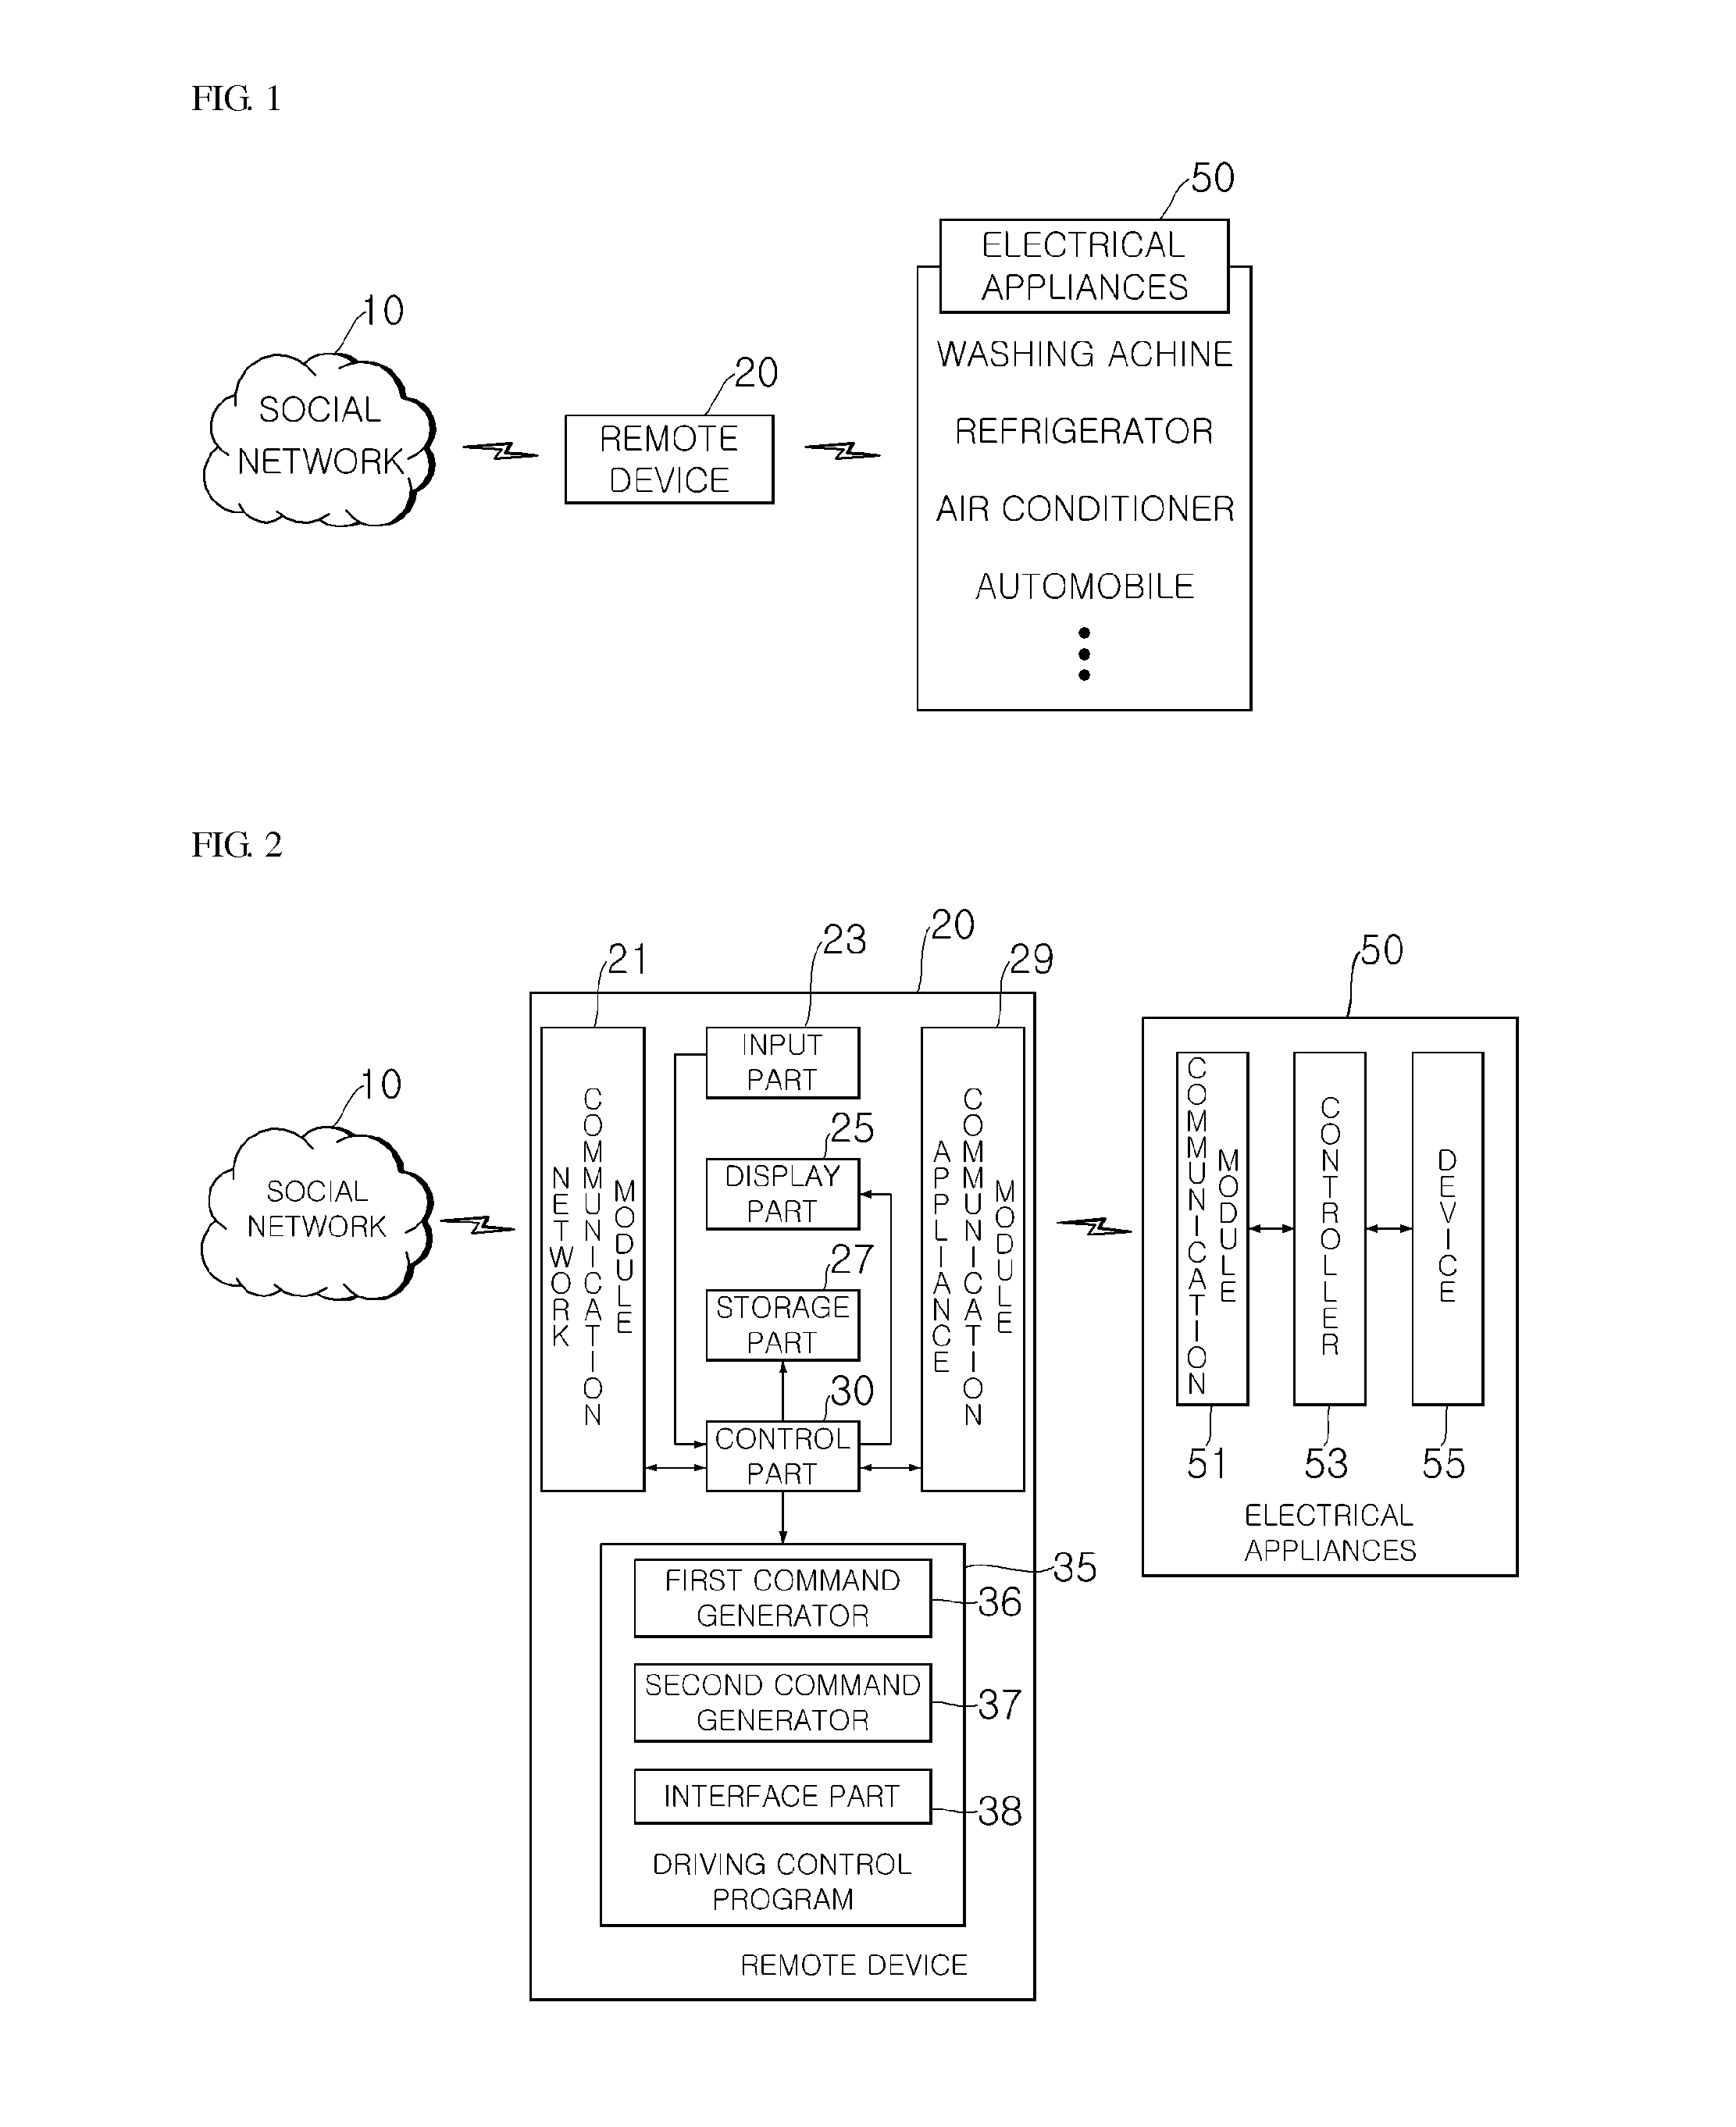 Customized control system for electrical appliances using remote device